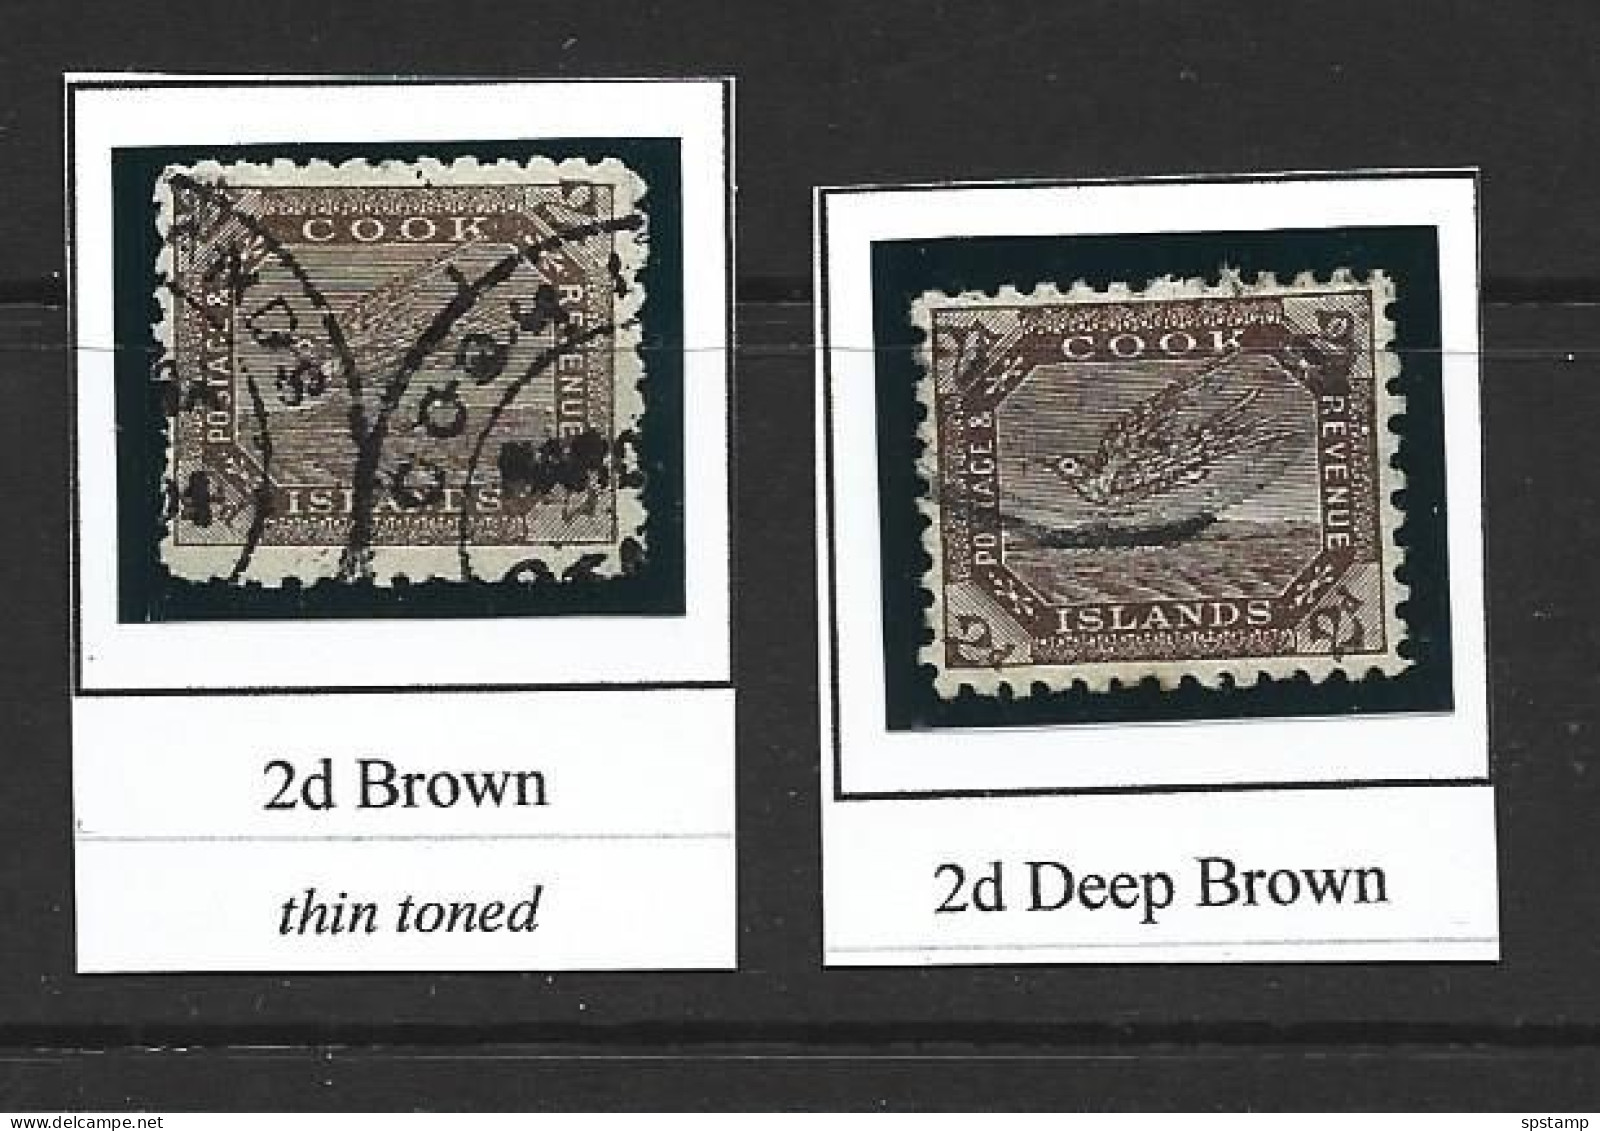 Cook Islands 1896 - 1900 2d Tern Bird Both Listed Shades FU - Cook